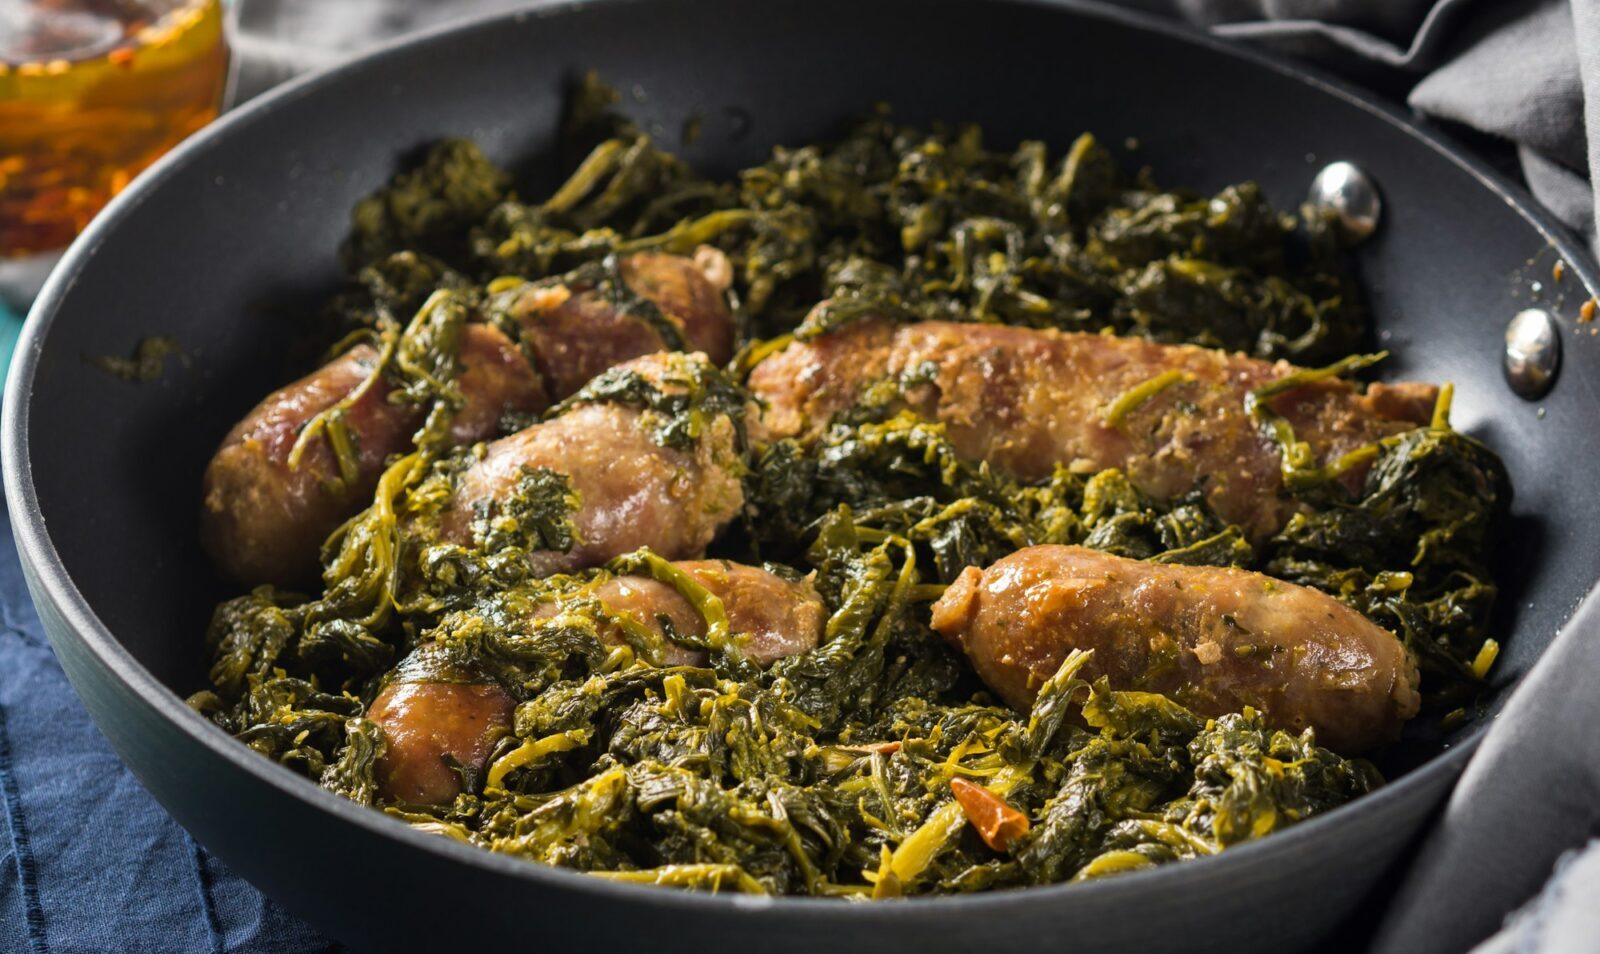 Italian sausages with rapini broccoli in a skillet